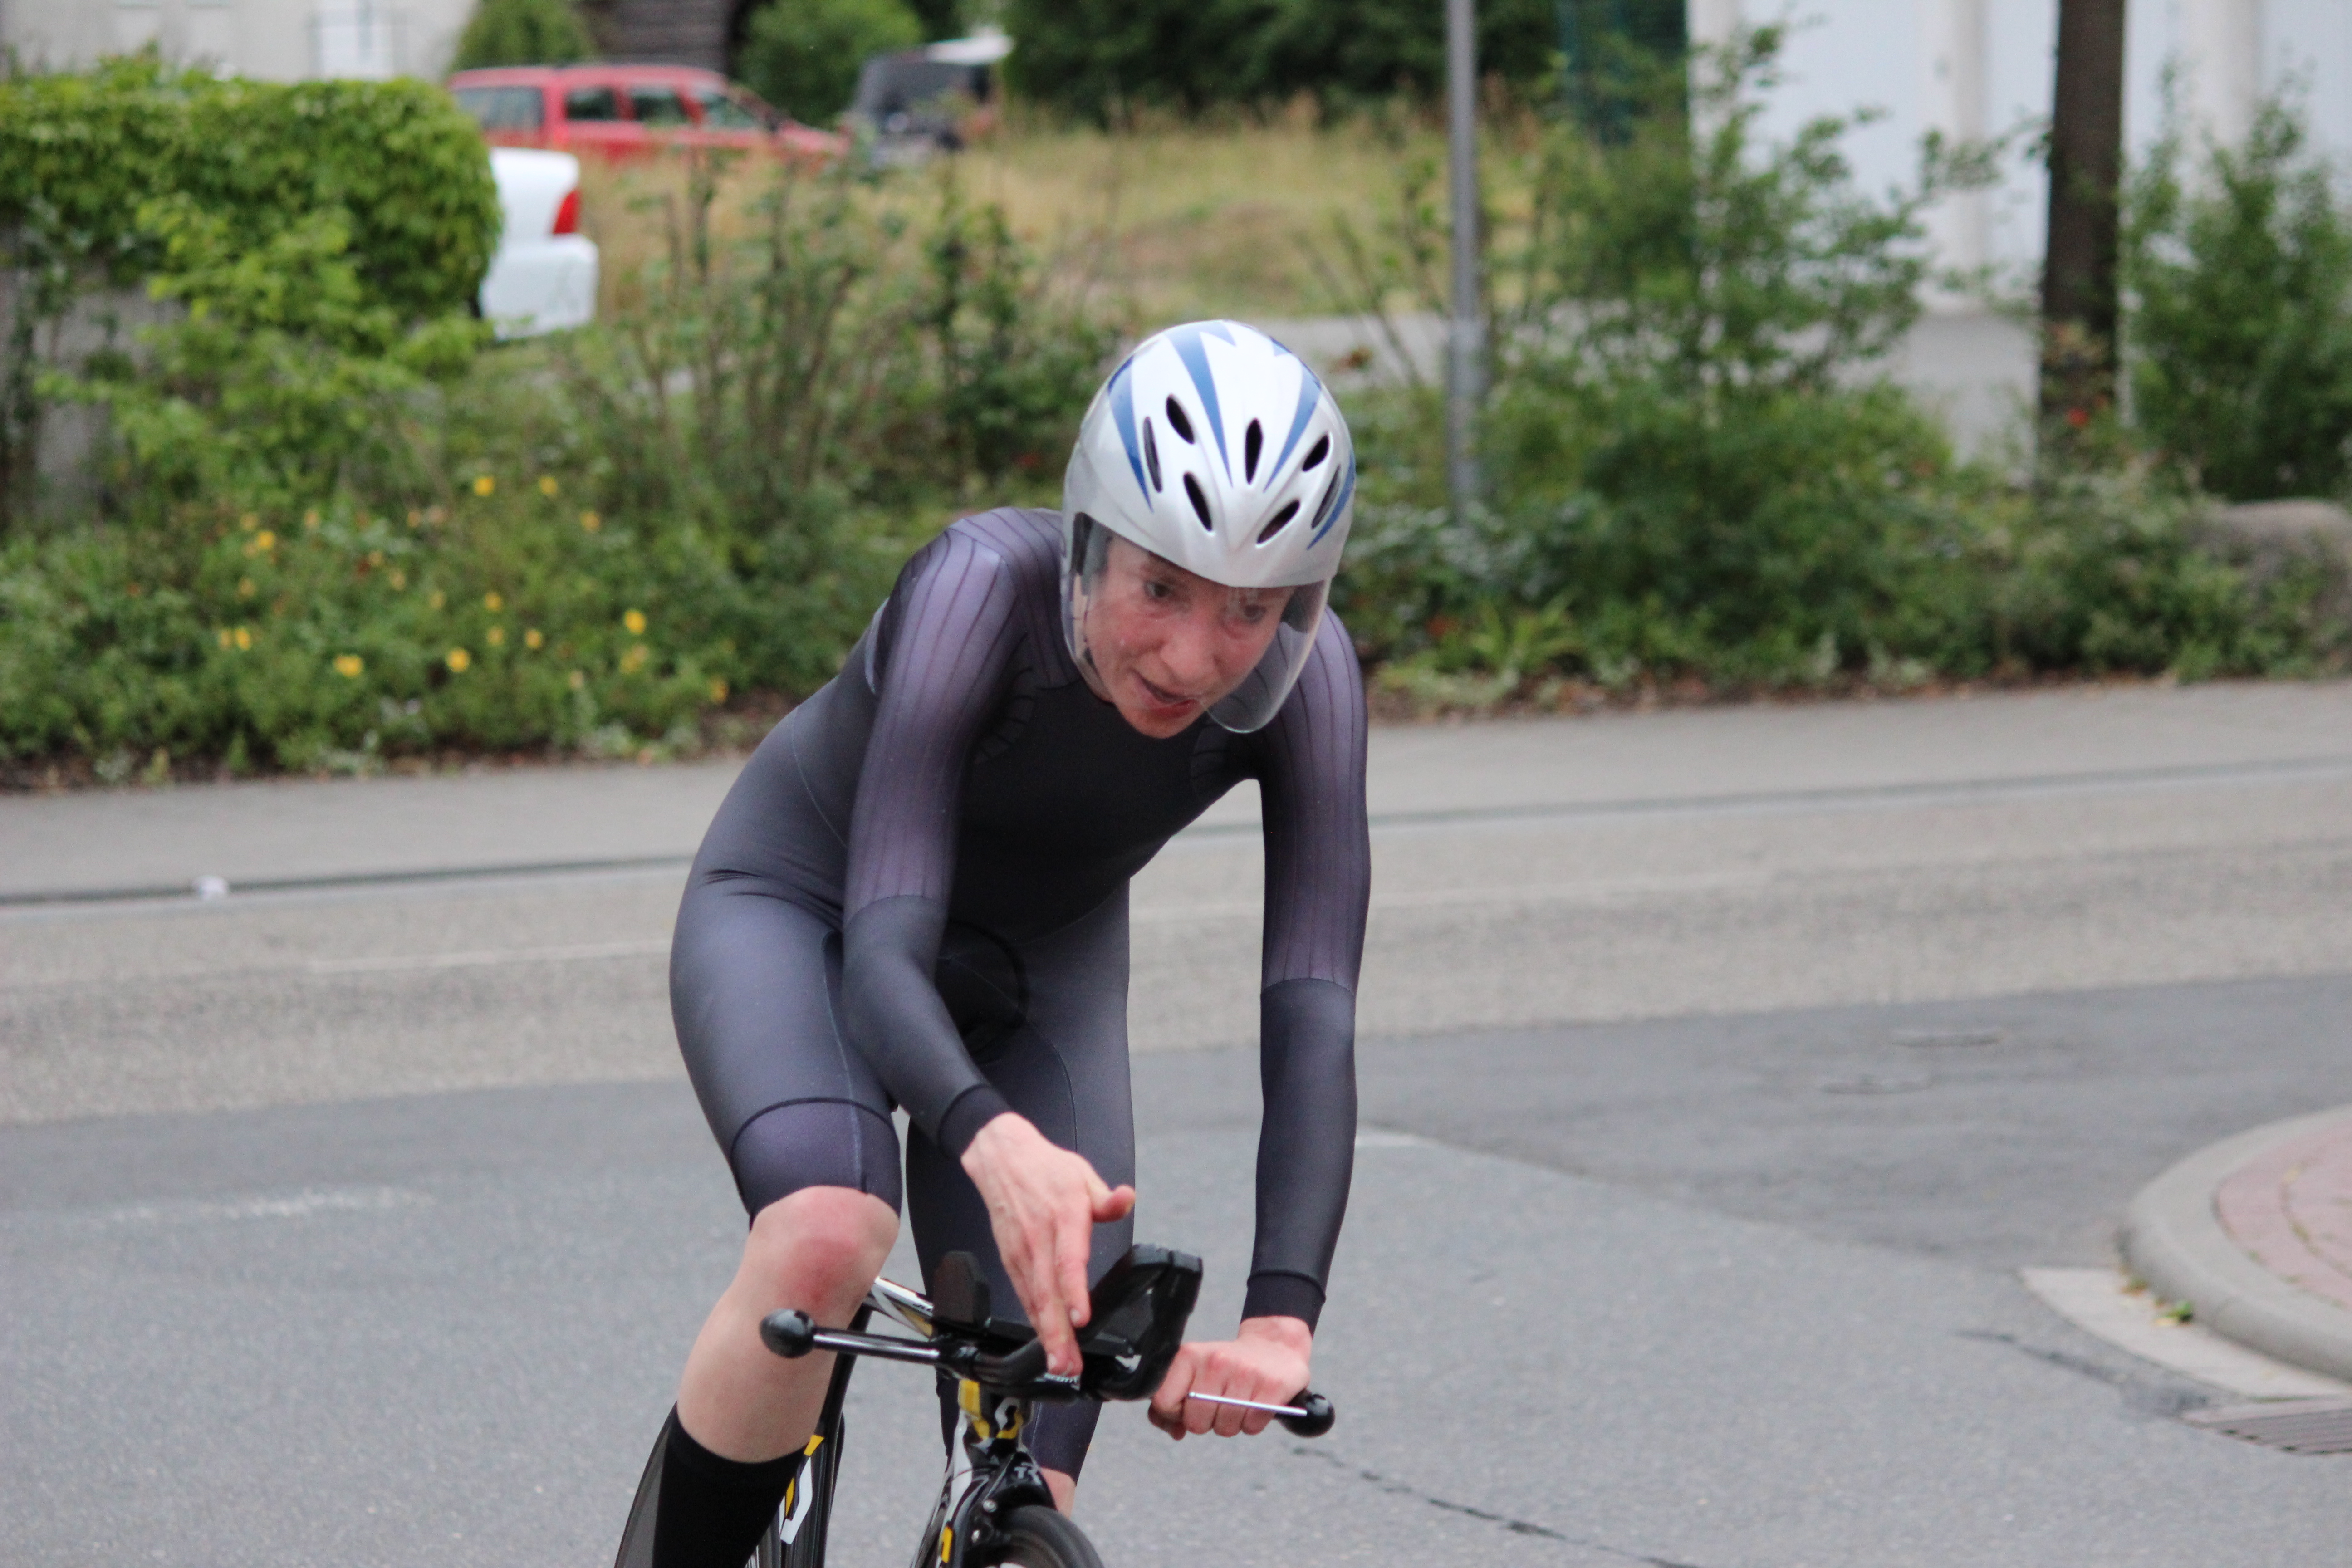 The senior two-times world champion and multiple Bavarian time trial champion Adelheid Schuetz, finished as amateur seventh position at the 2015 German championship of the elite female bicycle riders in Einhausen (Hessia). Photo: Christian Göckes